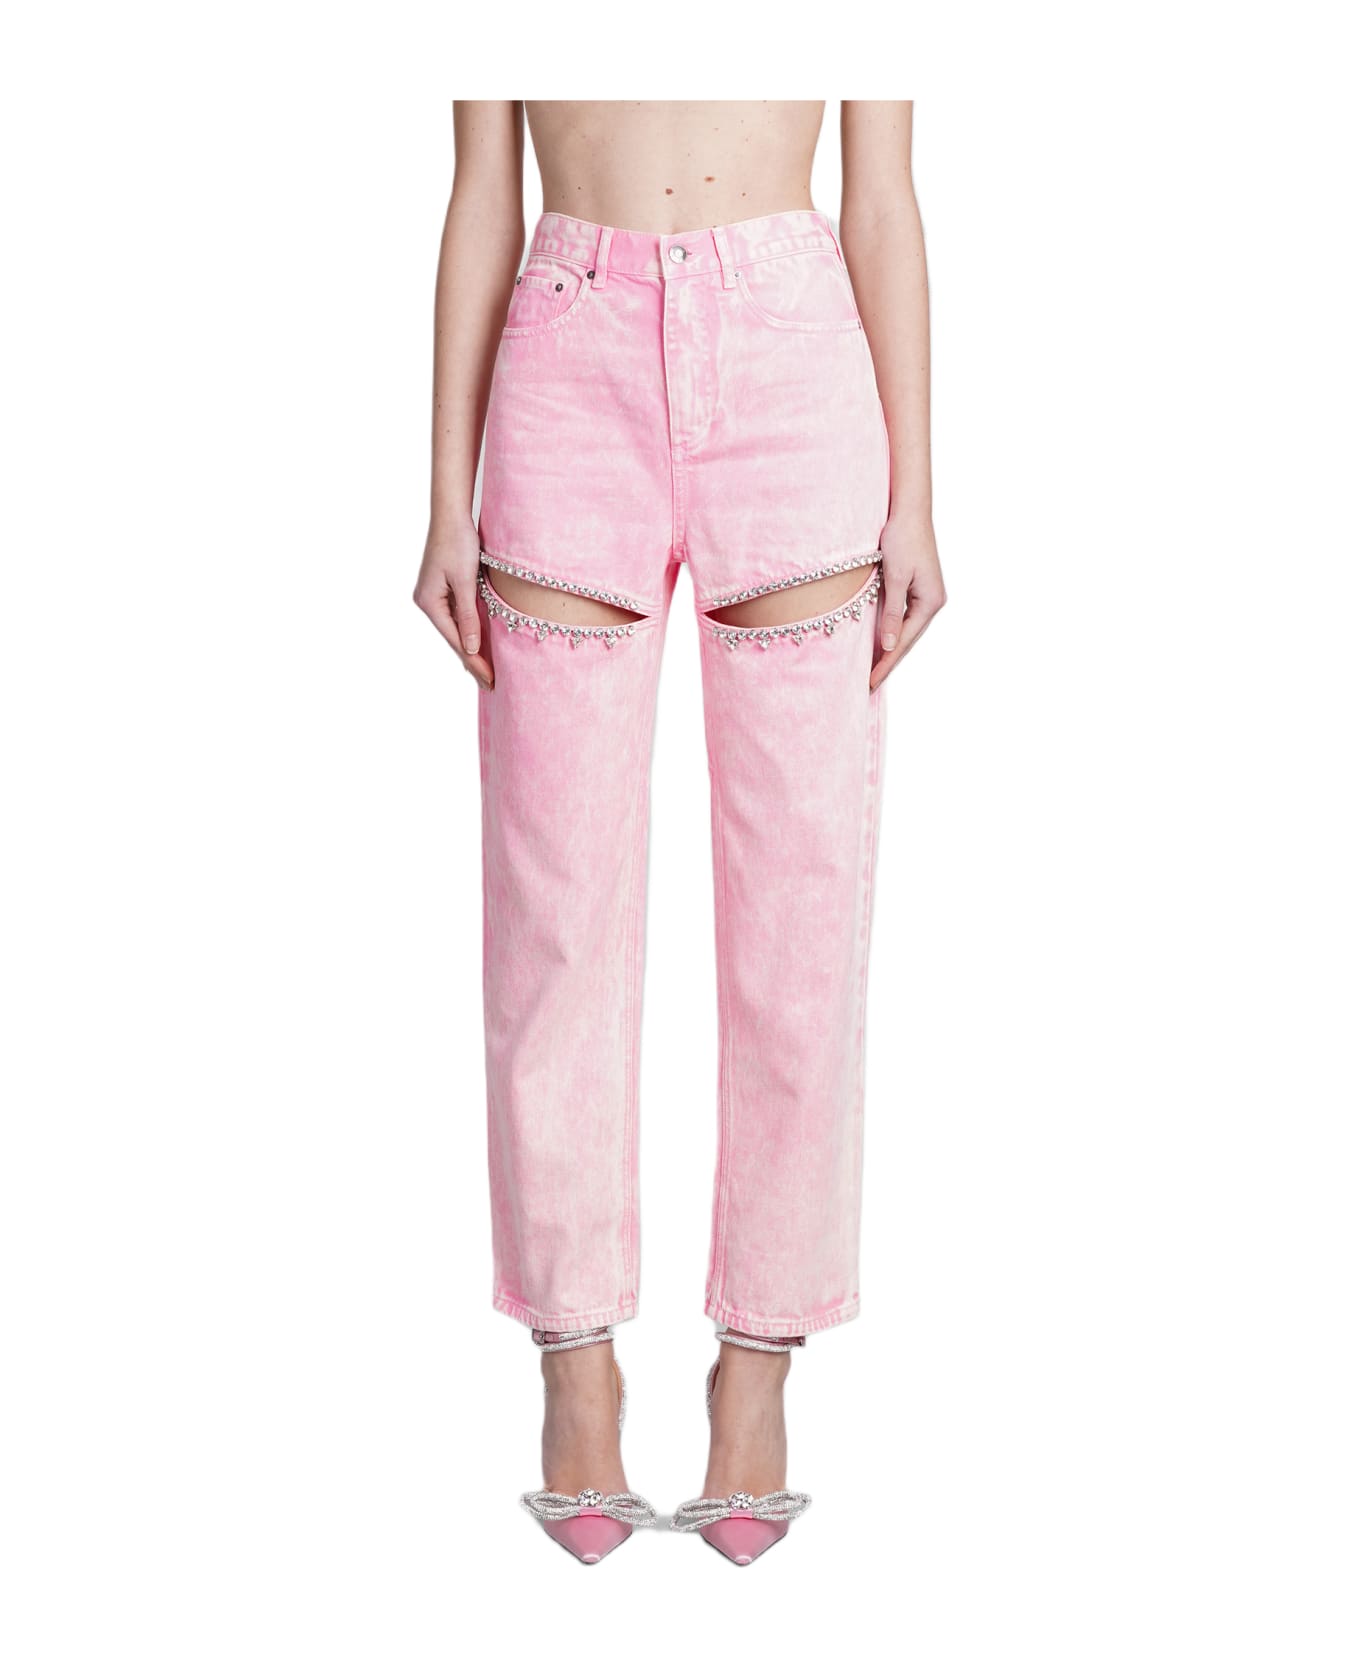 AREA Jeans In Rose-pink Cotton - rose-pink ボトムス